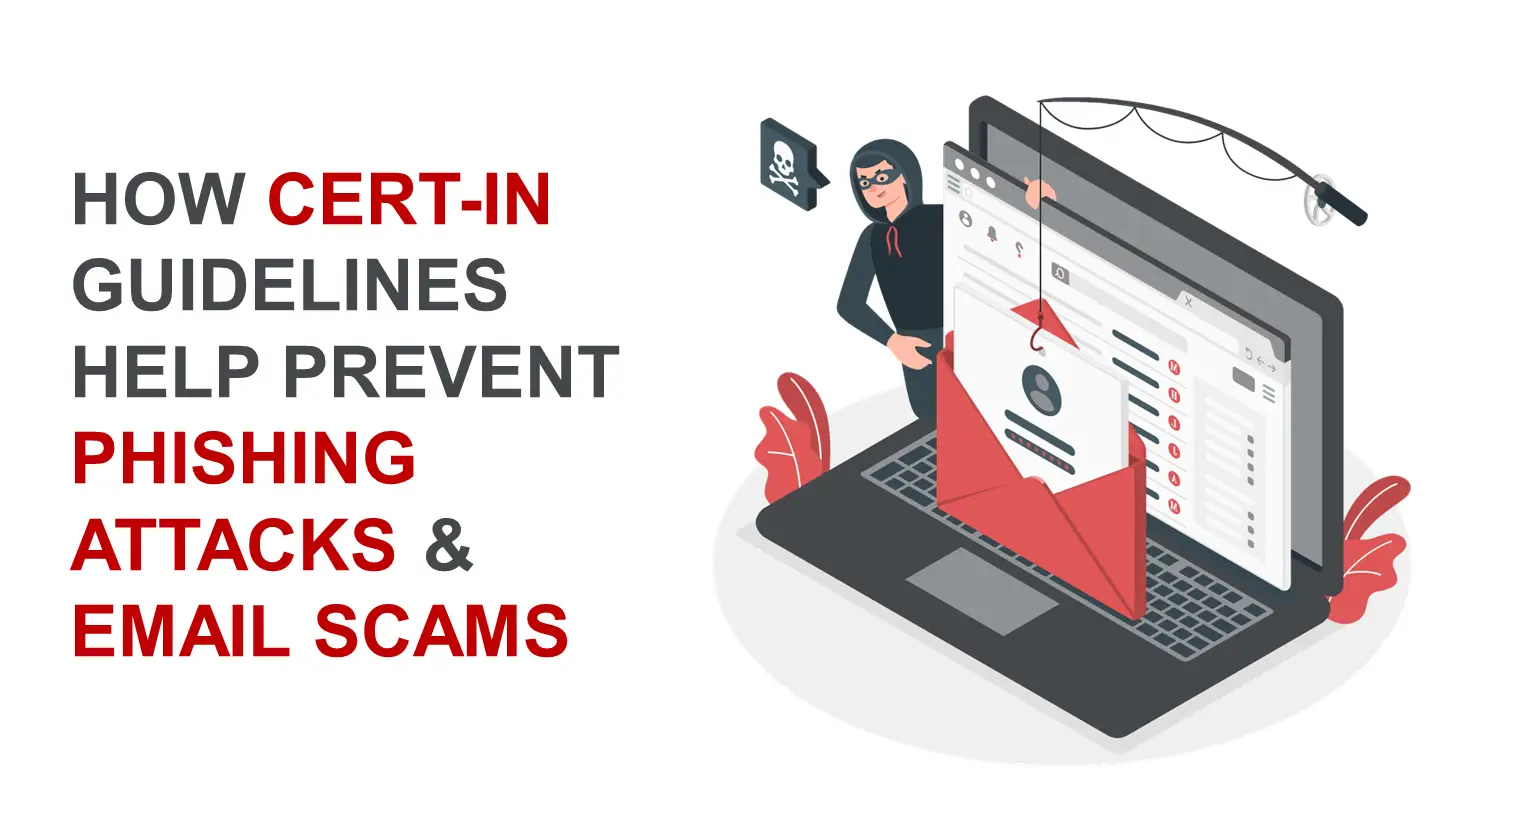 How CERT-In guidelines help prevent phishing attacks and email scams